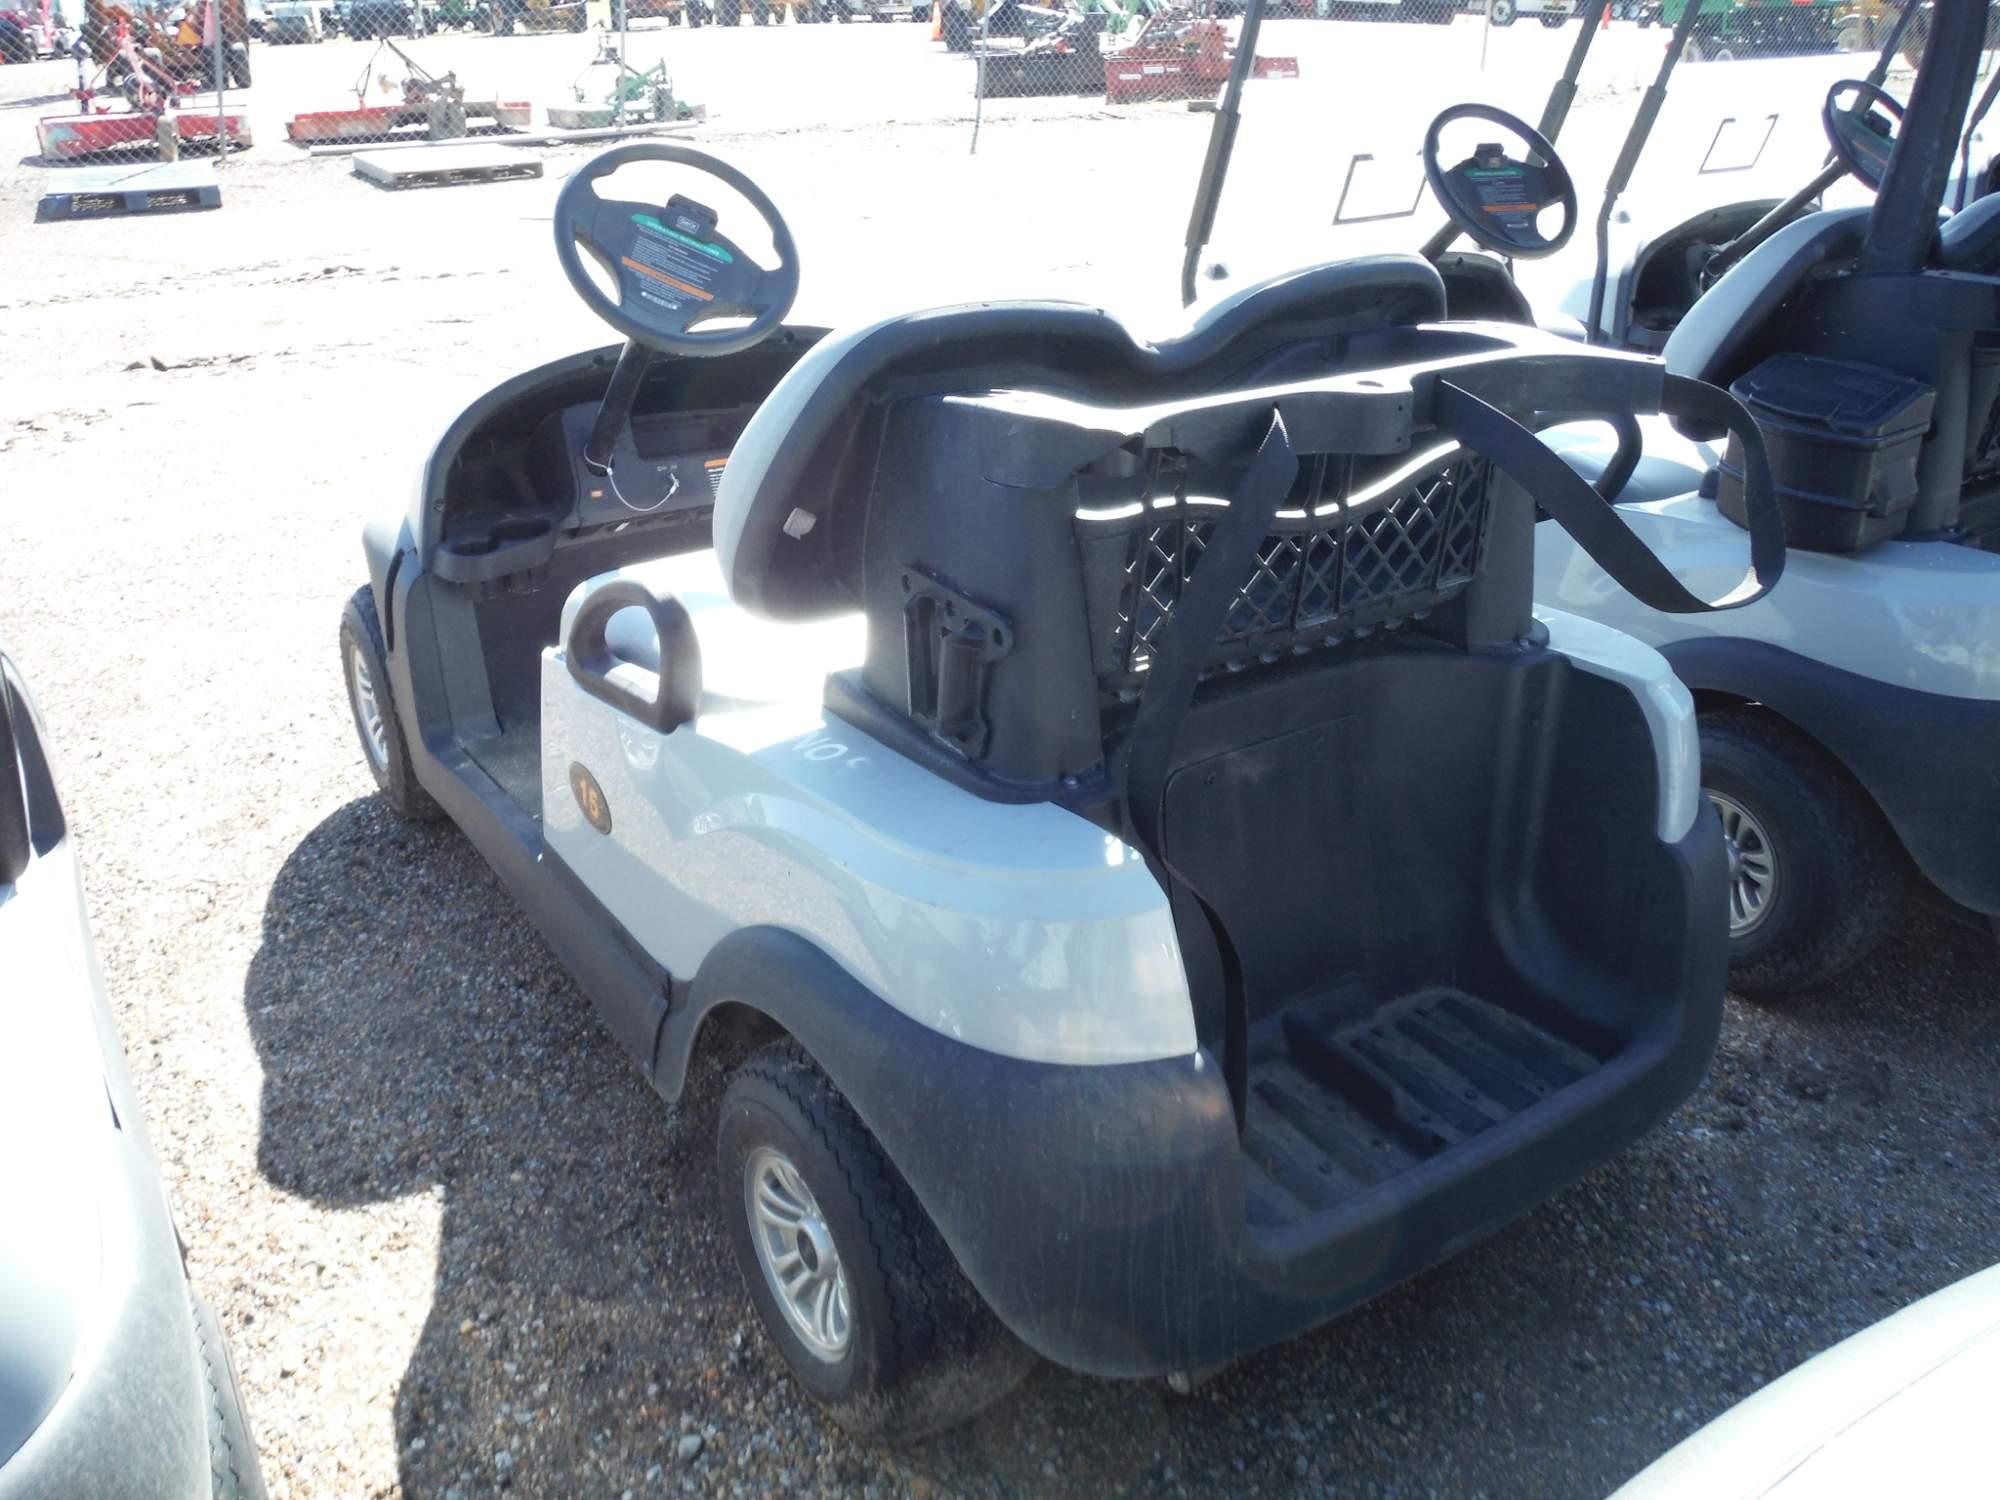 2022 Club Car Electric Golf Cart, s/n JE2220-287562 (No Title): No Charger